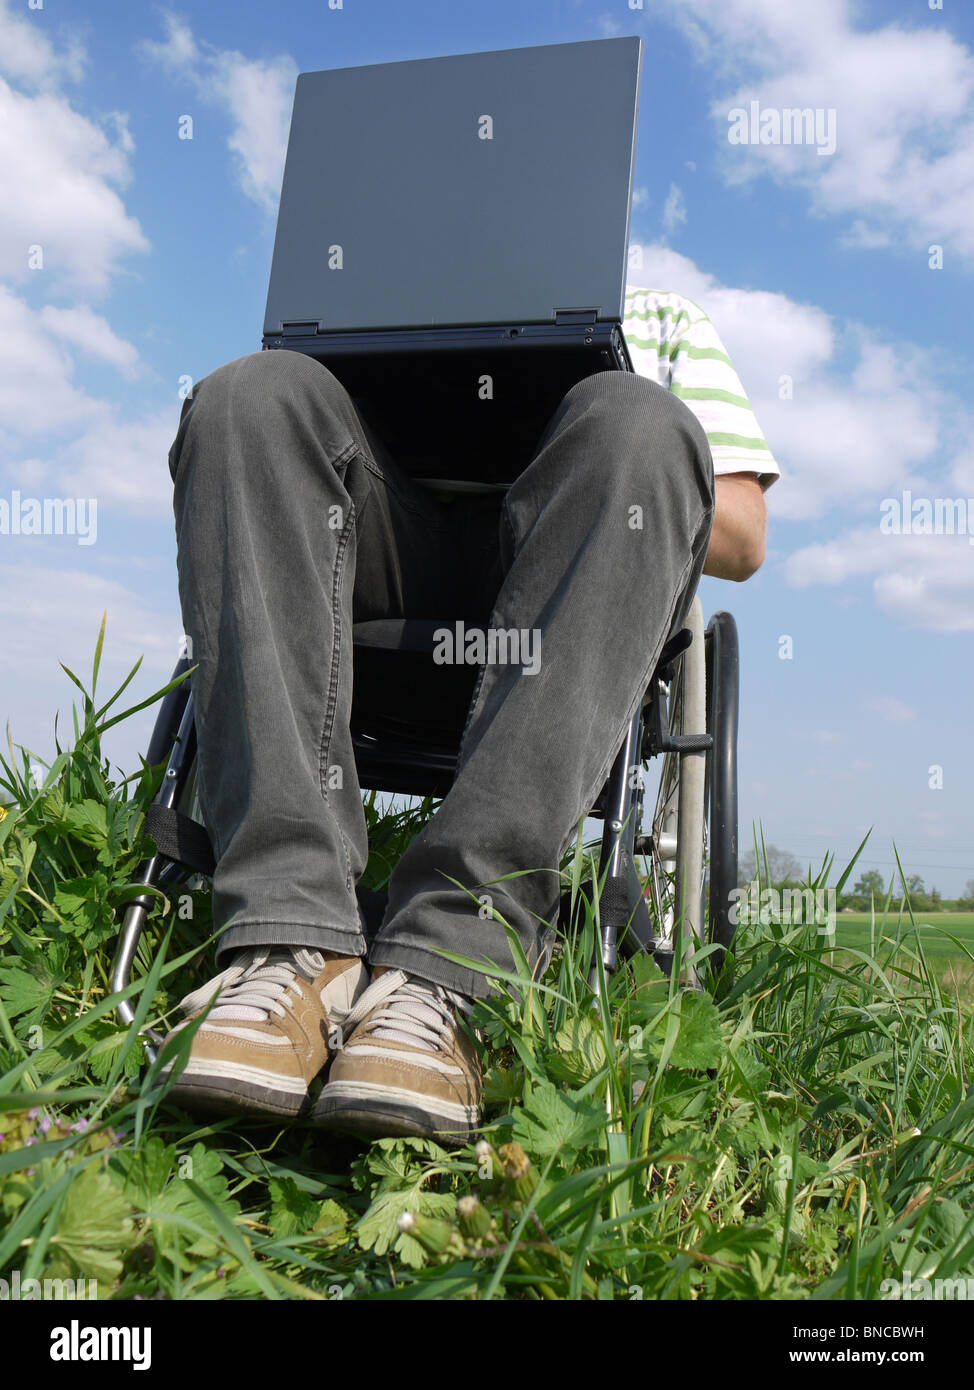 Handicapped man on wheelchair using laptop outdoors Stock Photo